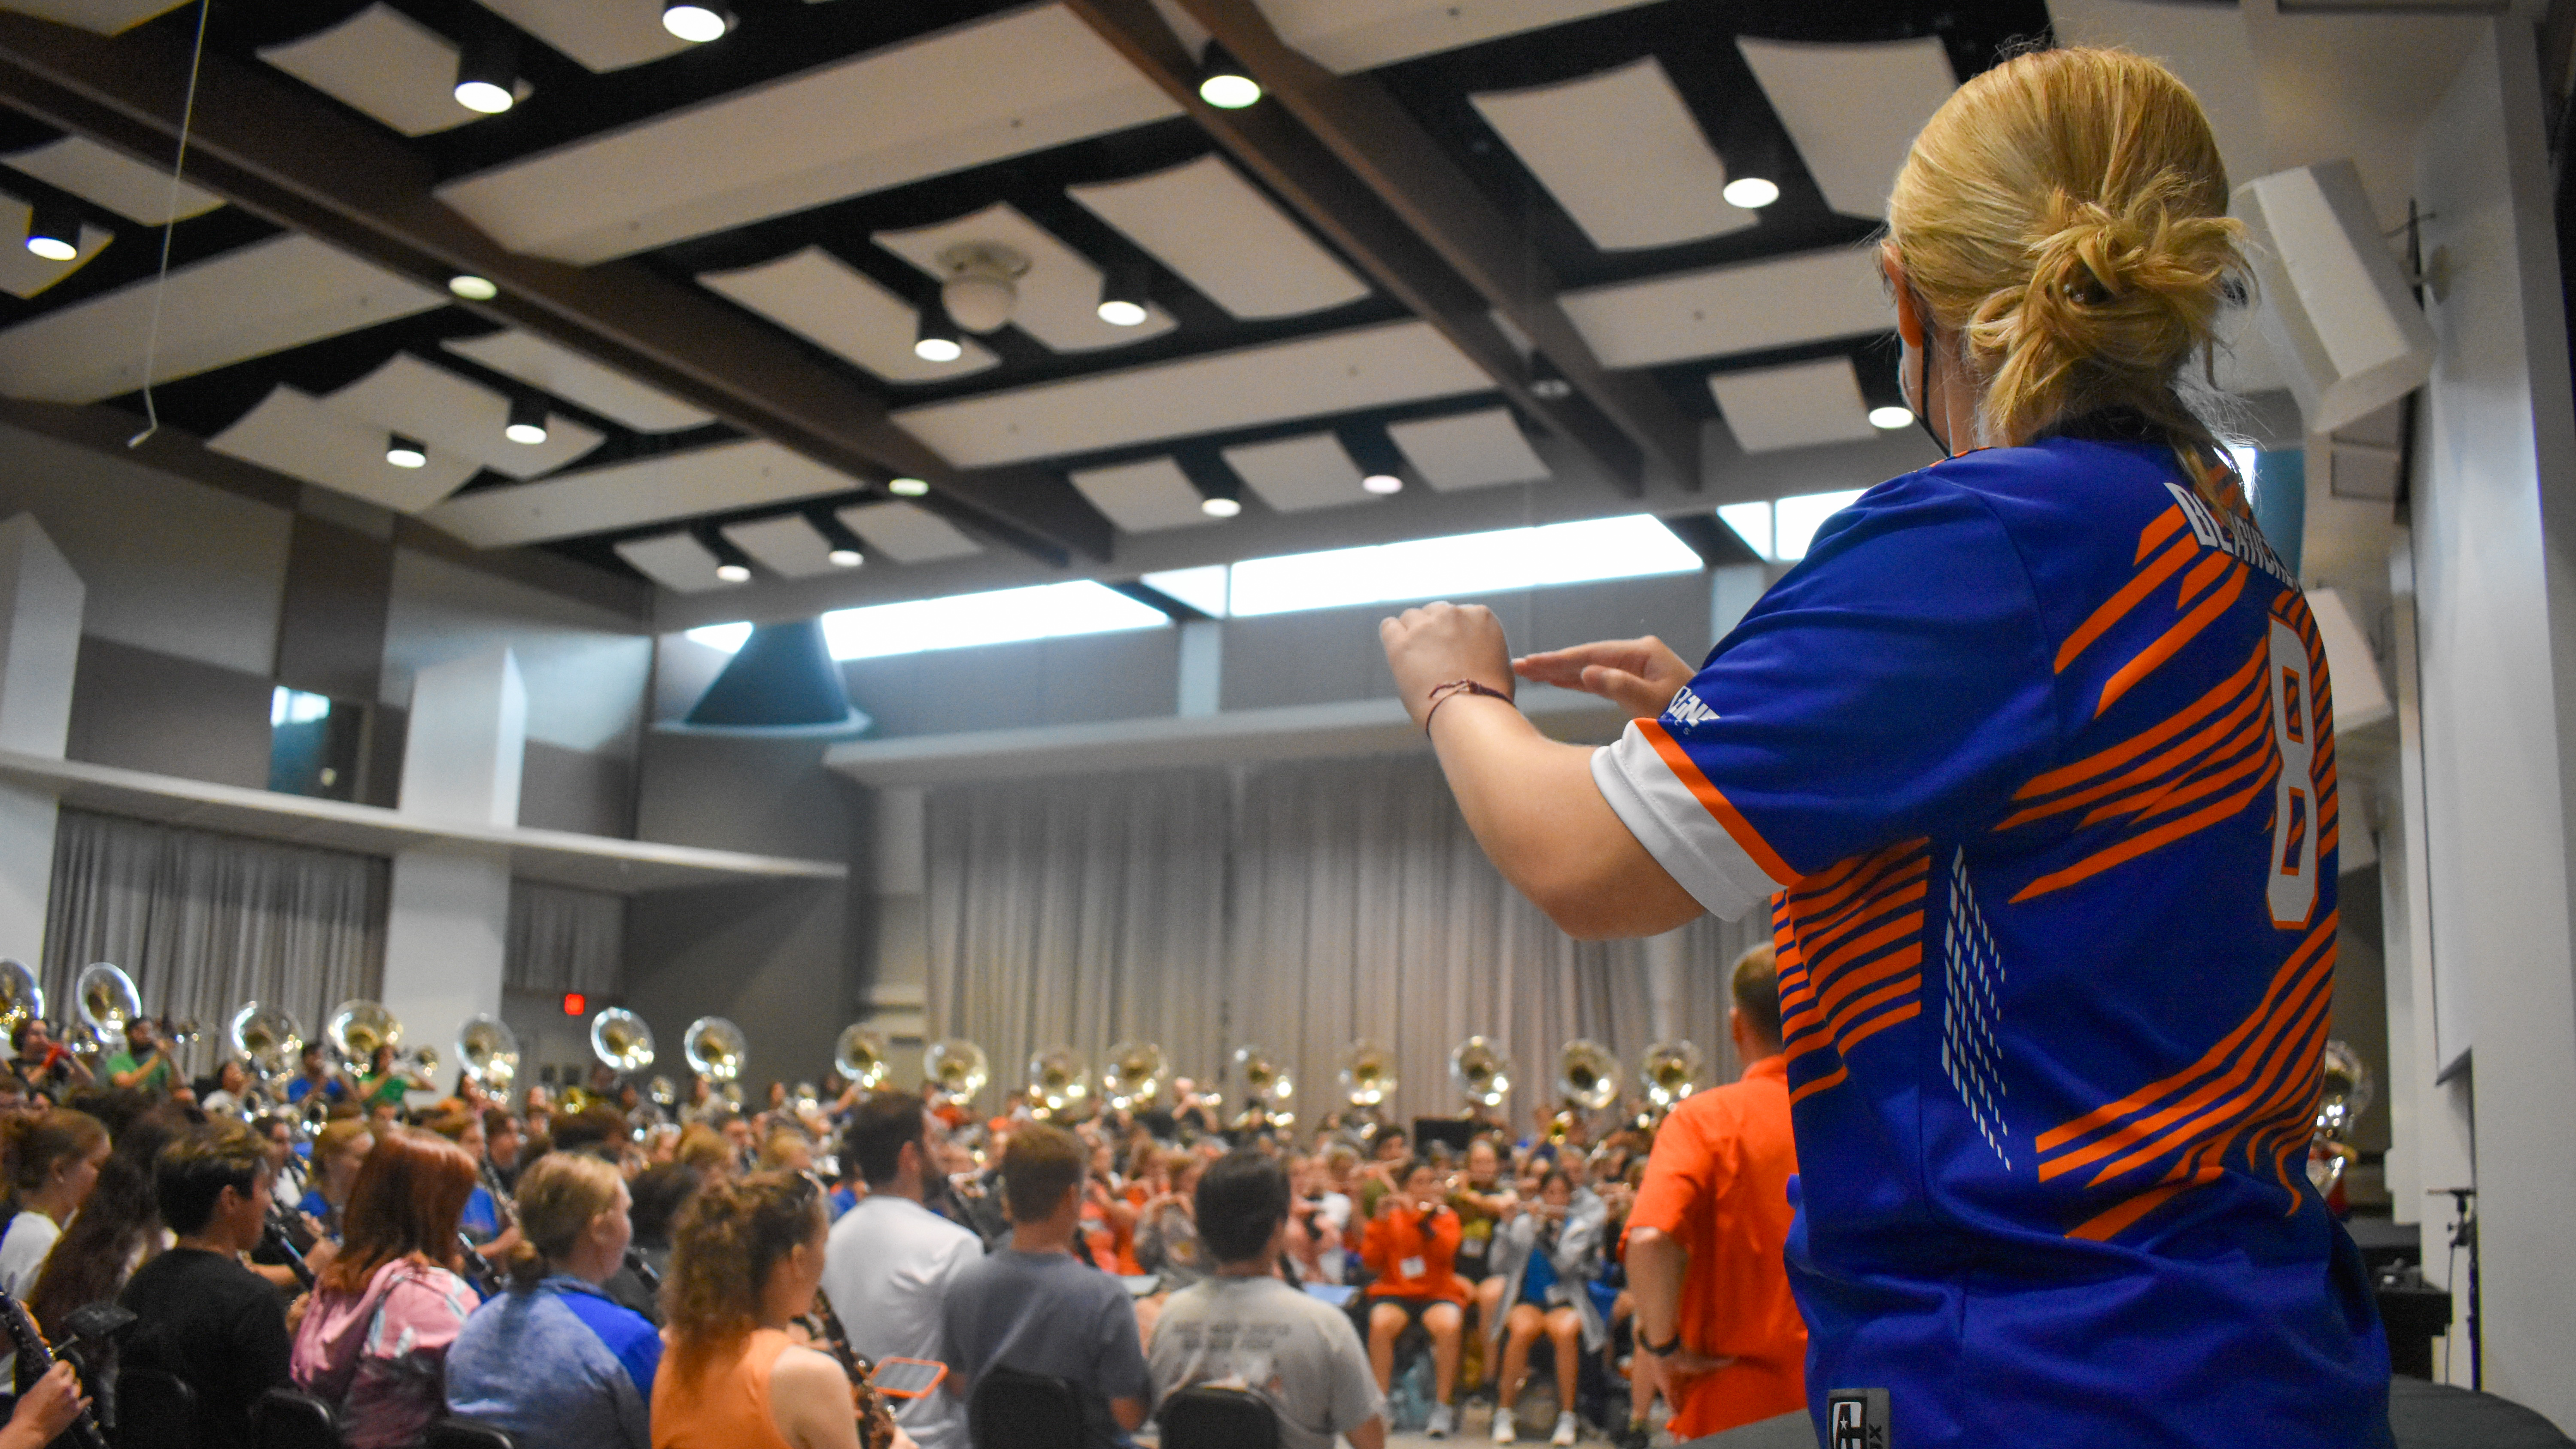 A drum major conducts a band sitting in a band hall.